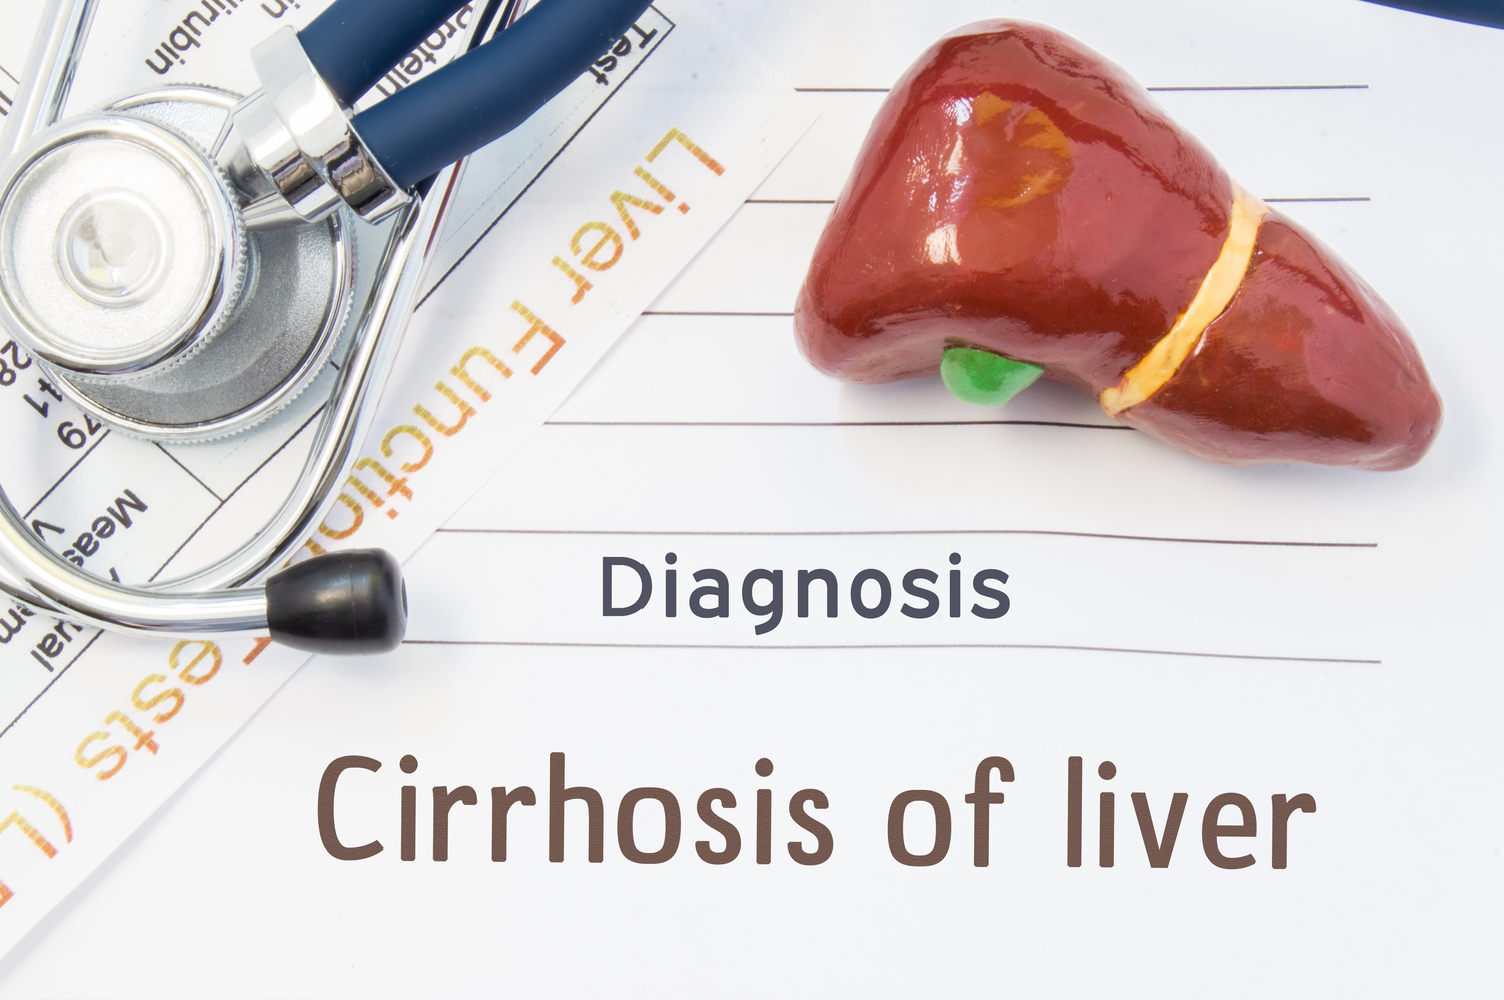 All you need to know about cirrhosis of the liver